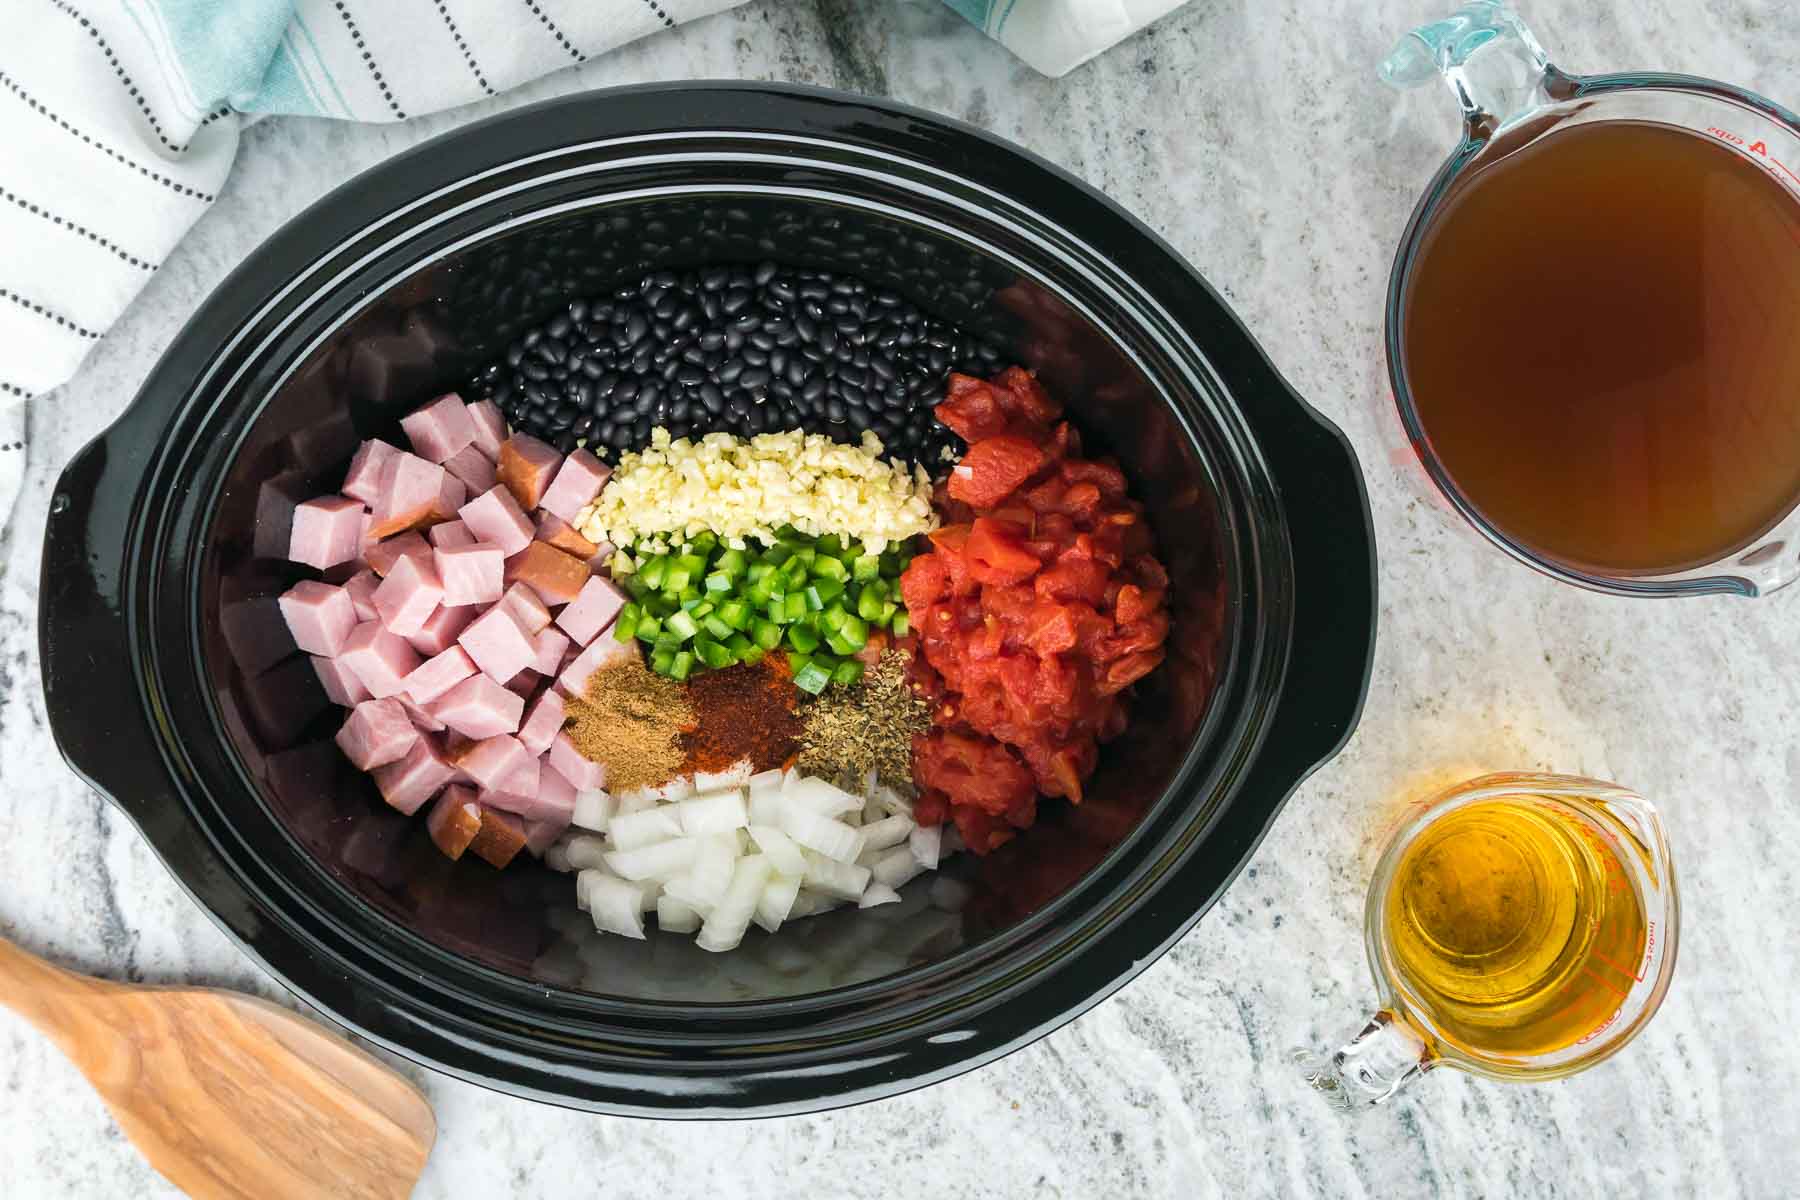 Diced ham, tomatoes, spices and vegetables in an oval black crock pot.